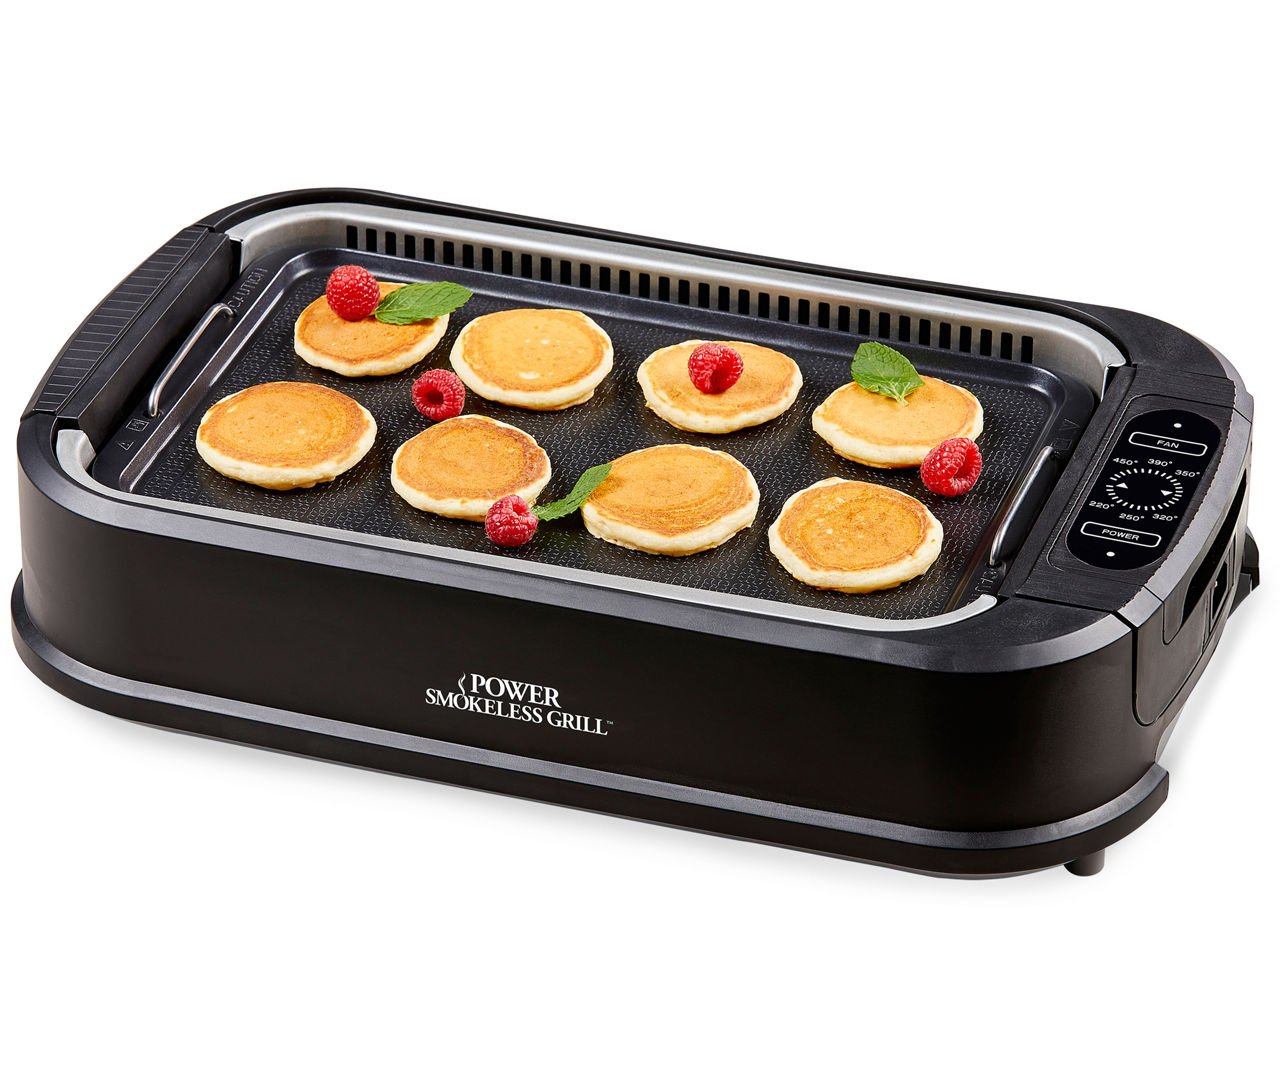 OfficialPowerXL on X: Why wait for grilling season when you can grill all  year round in your kitchen! The PowerXL Smokeless Grill has smokeless  technology so it's easy to get that grilled